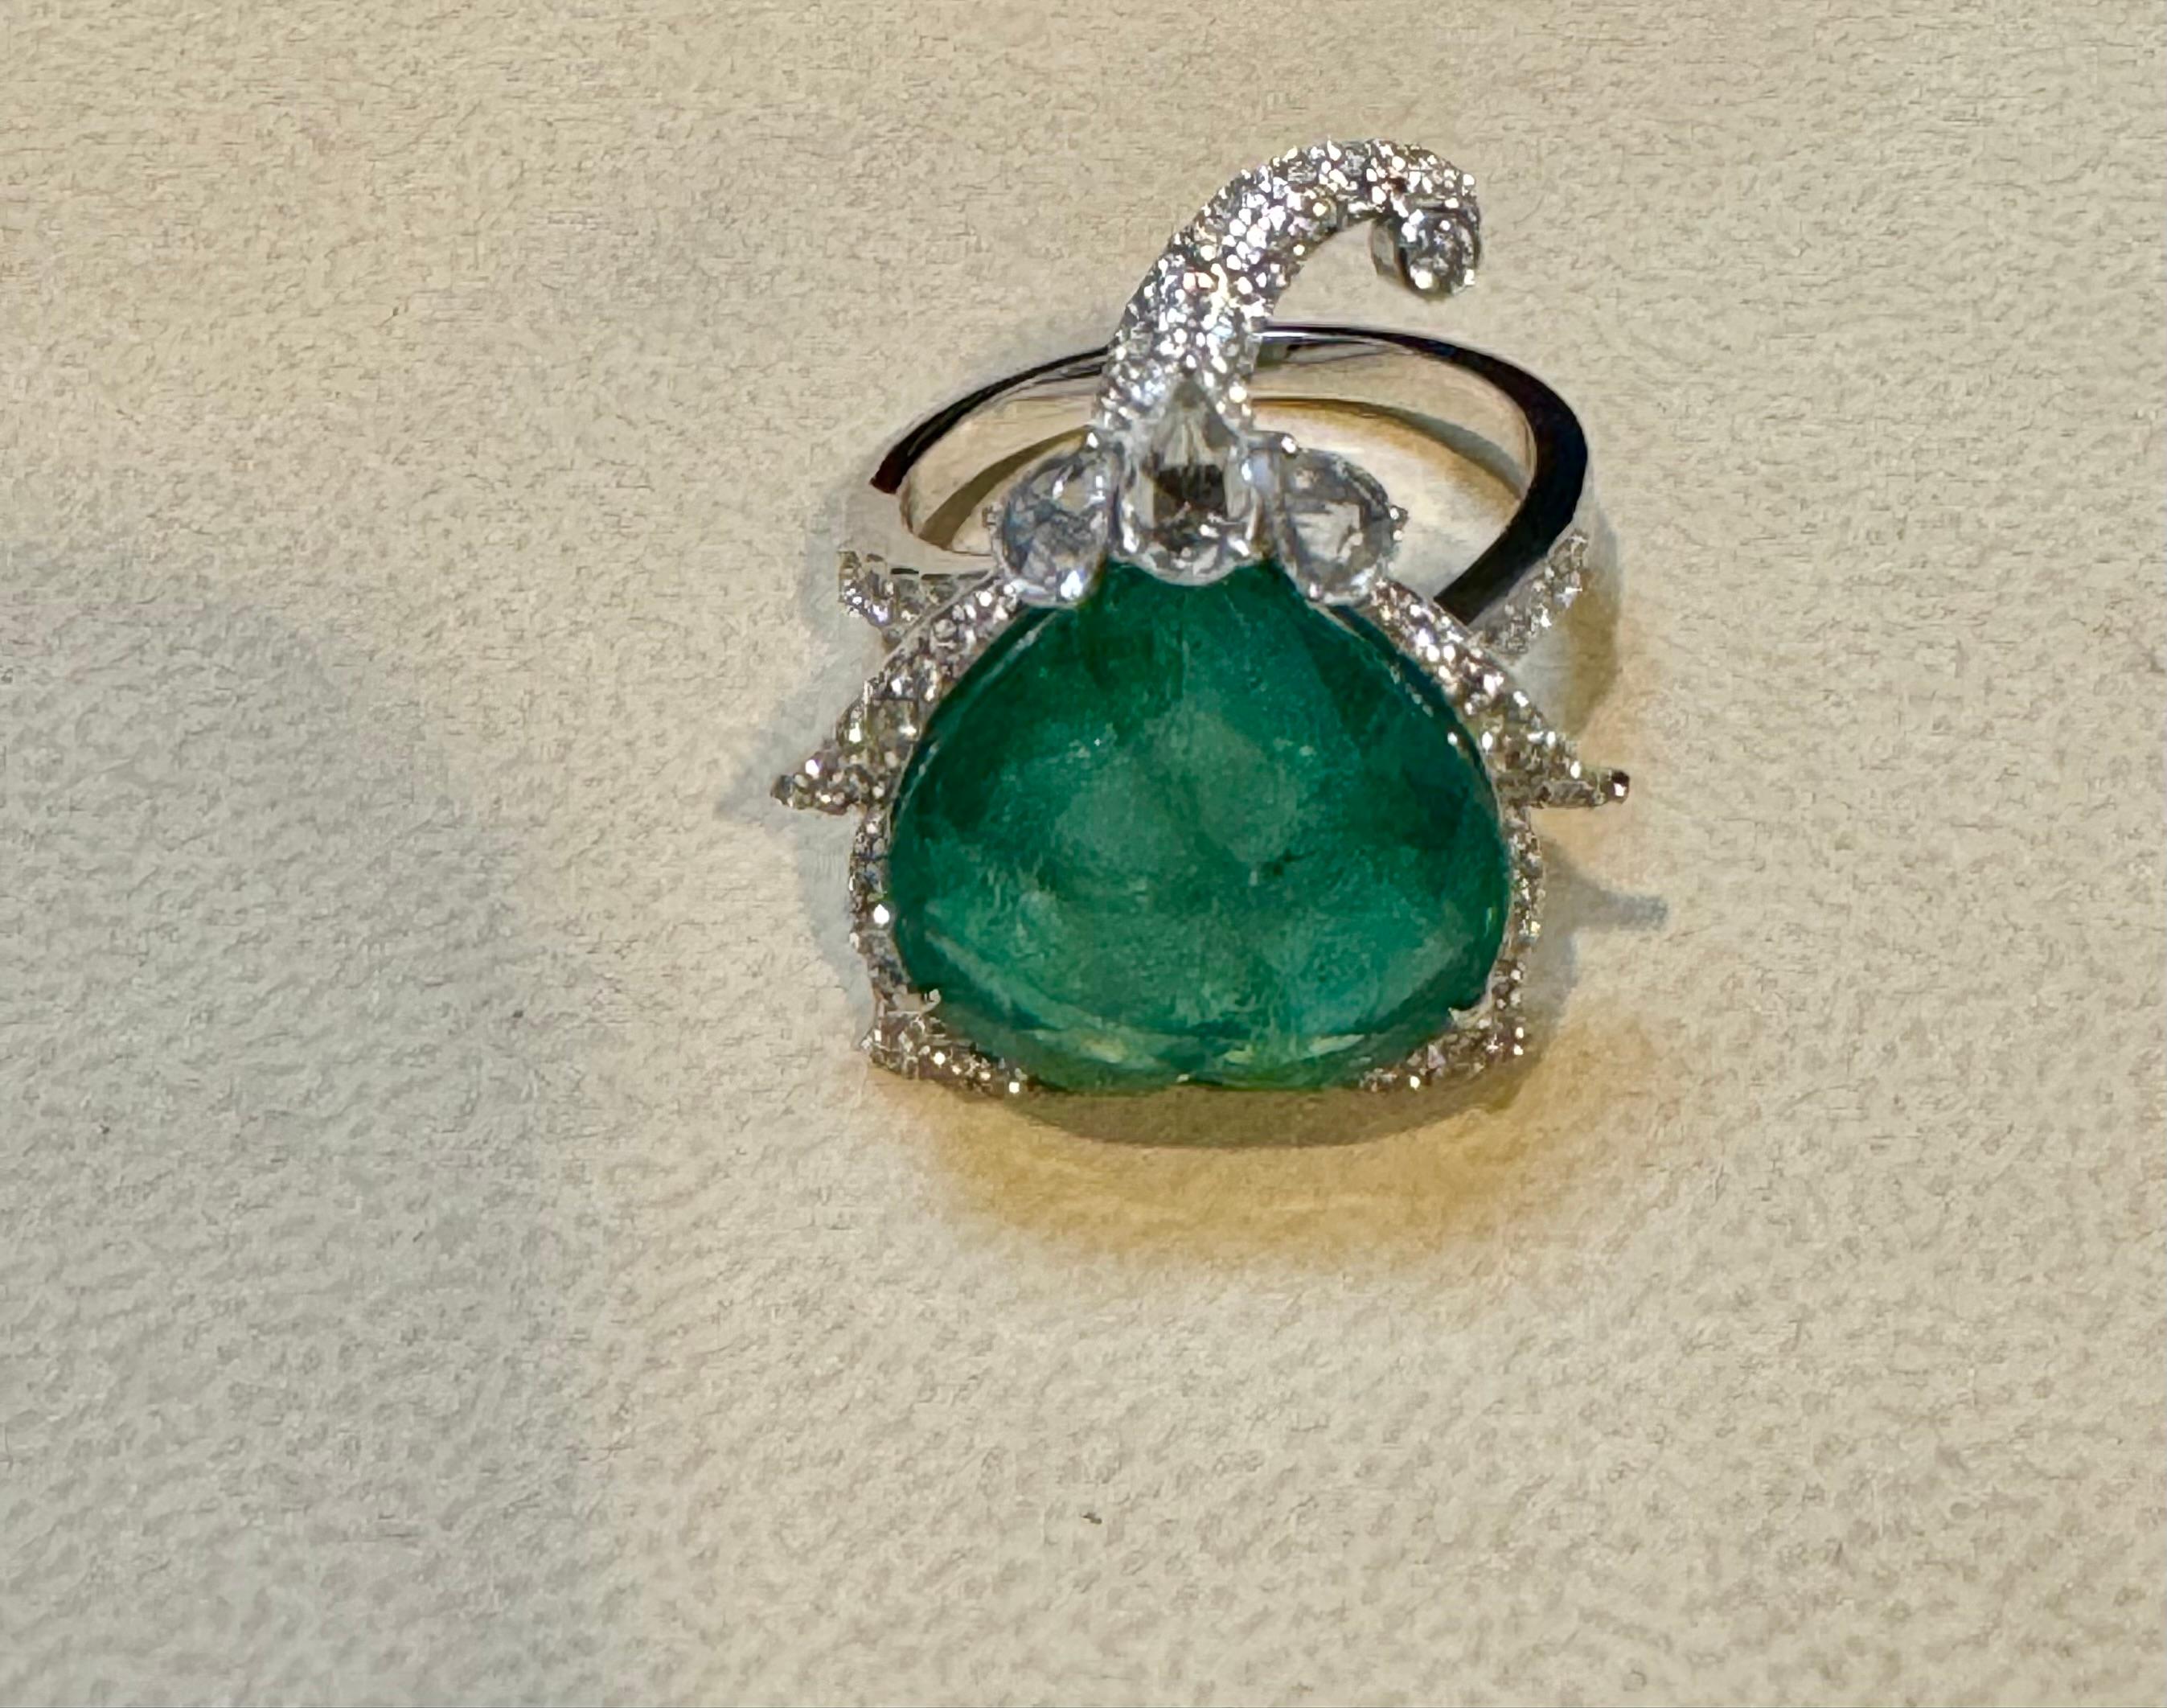 13 Ct  Zambian Heart Cut Emerald & 1.5 Ct Diamond Ring, 18 Kt Gold Size 8.5  In Excellent Condition For Sale In New York, NY